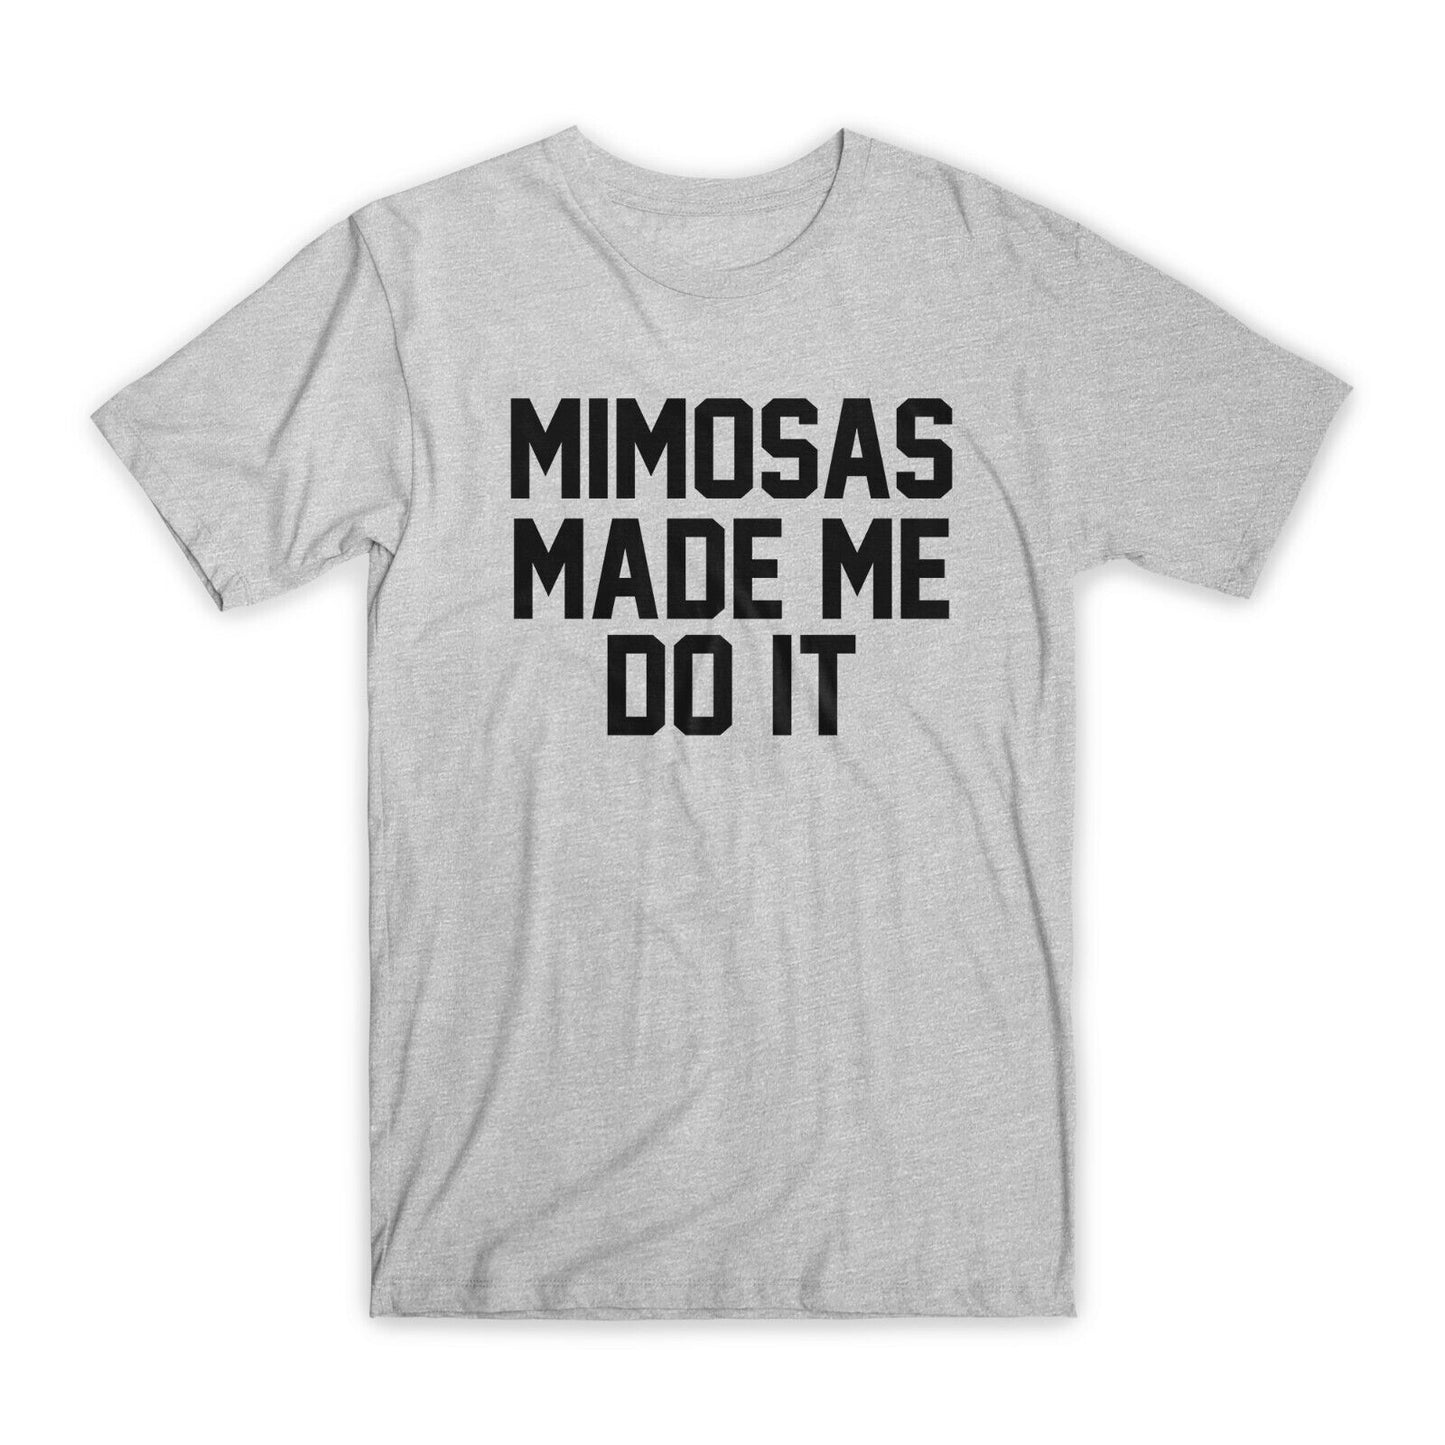 Mimosas Made Me Do It T-Shirt Premium Soft Cotton Crew Neck Funny Tees Gifts NEW